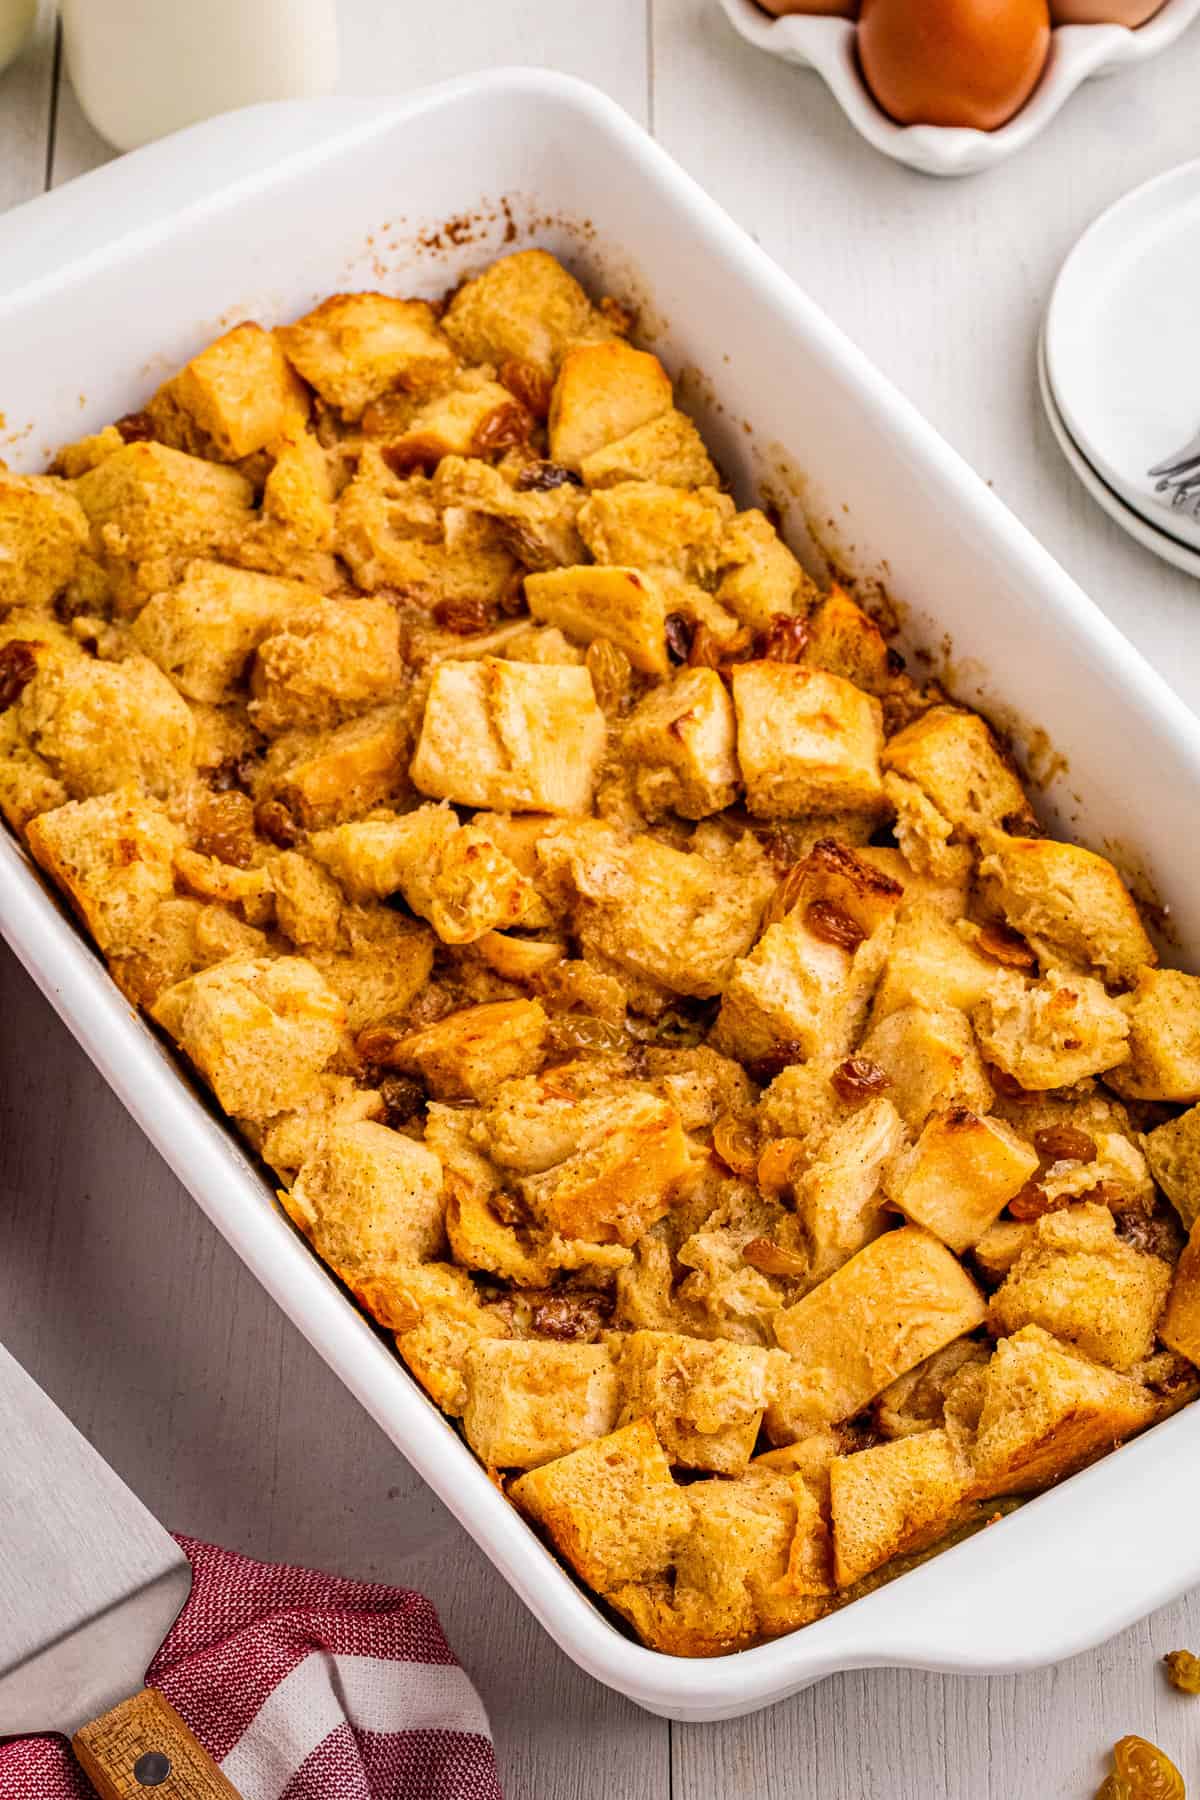 Baked Bread Pudding in white casserole dish